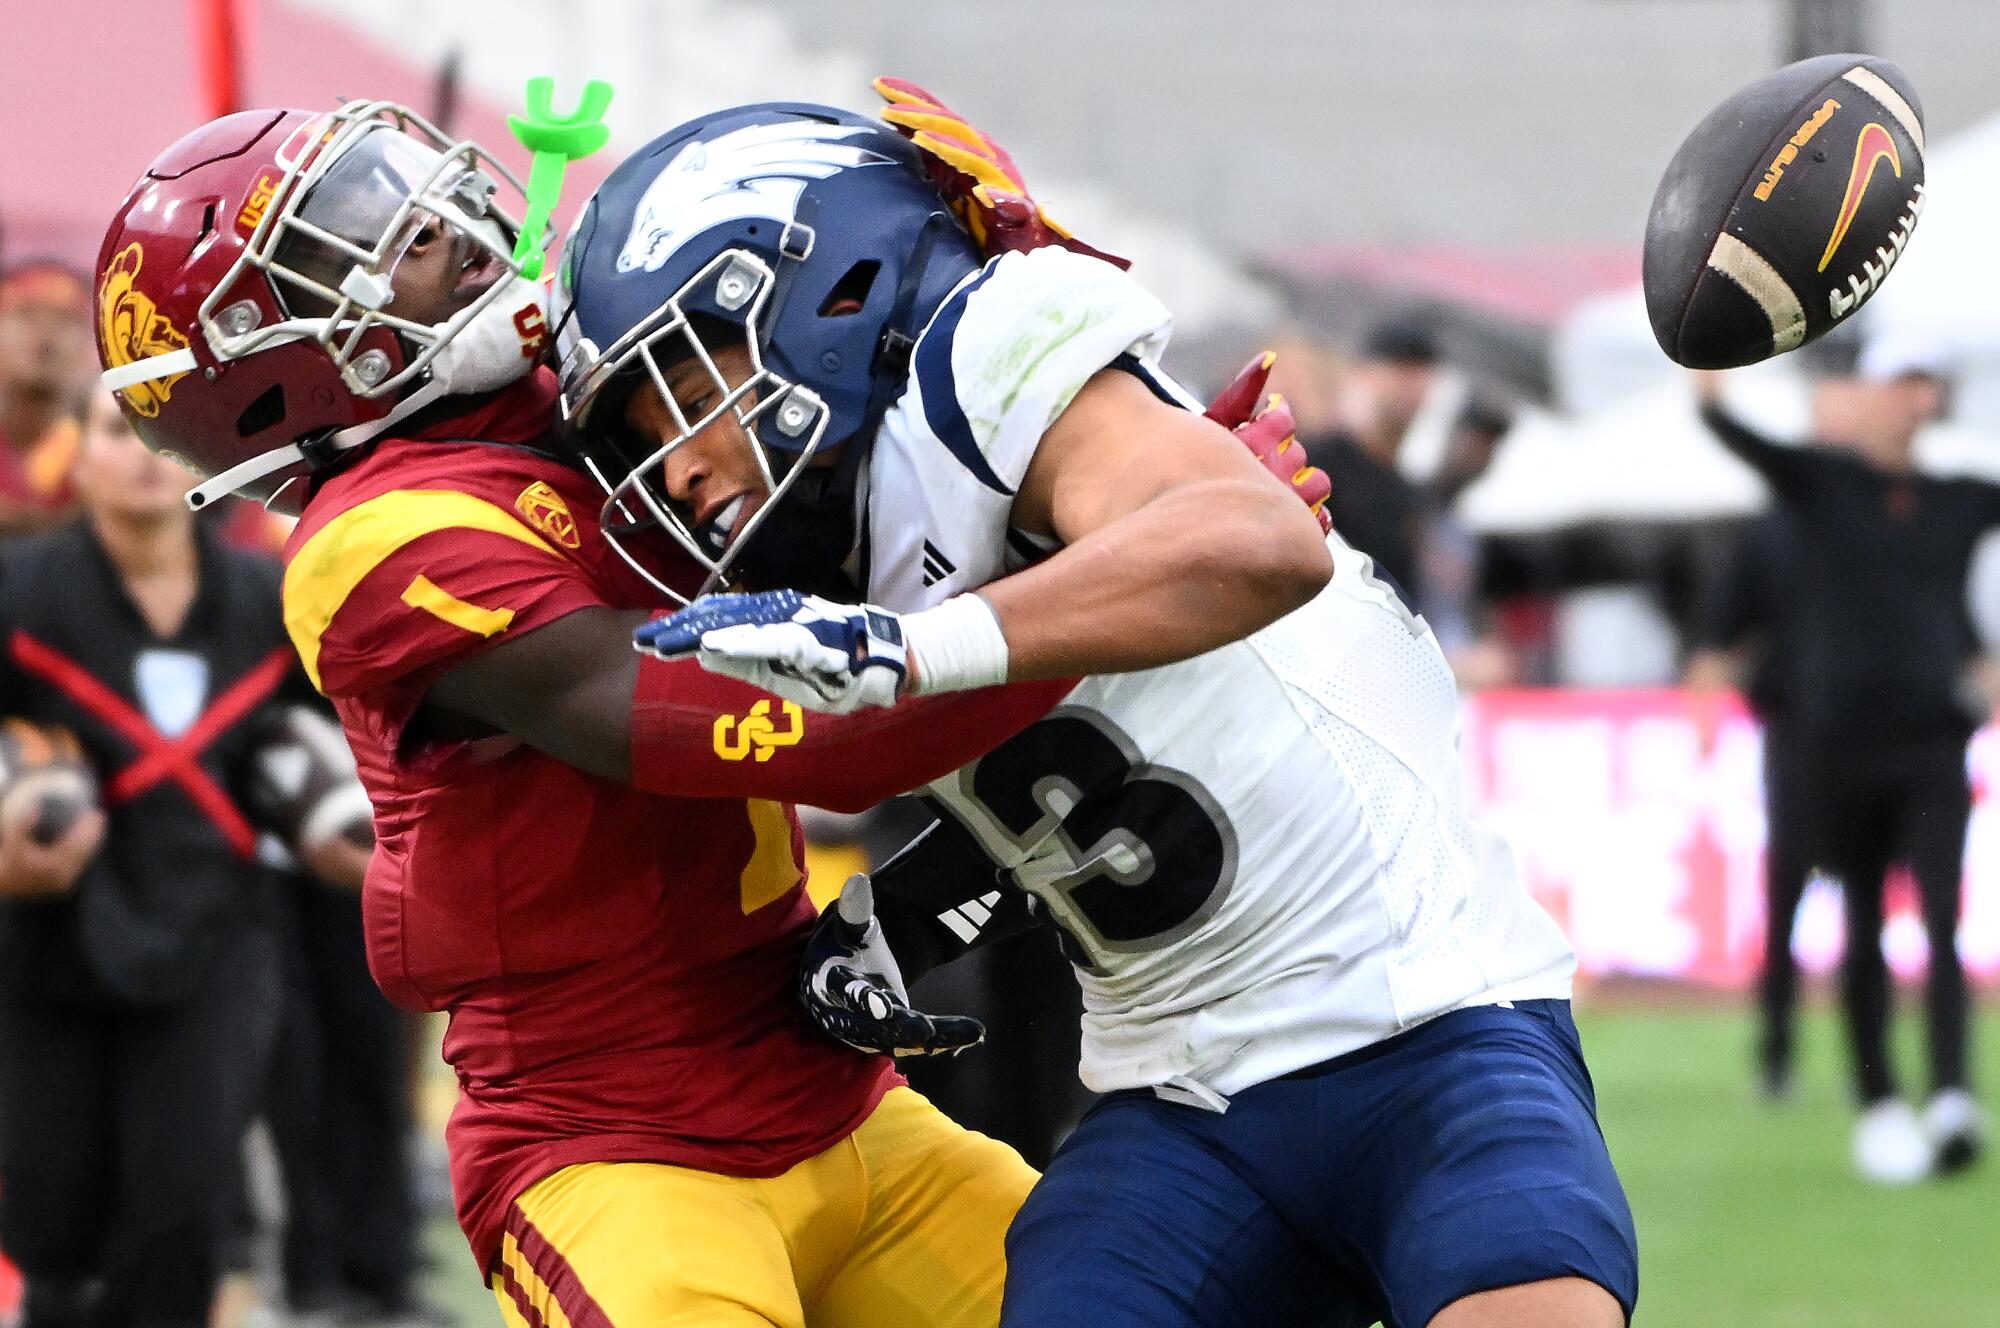 A USC receiver and a Nevada defender tangle as the ball falls incomplete